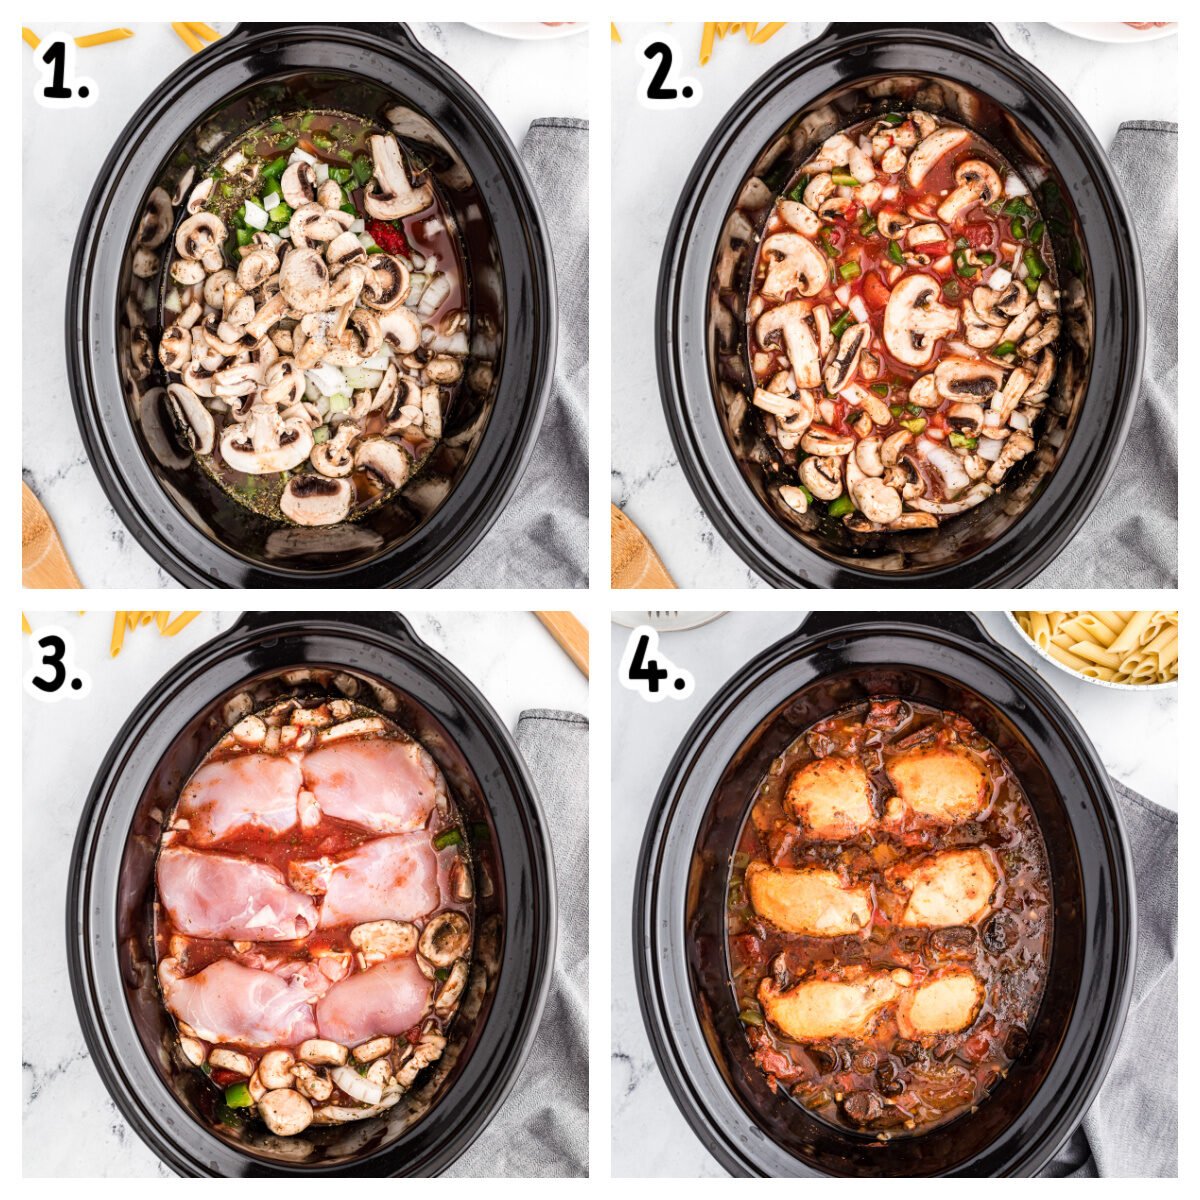 4 images about how to assemble chicken caccitaore in the slow cooker.